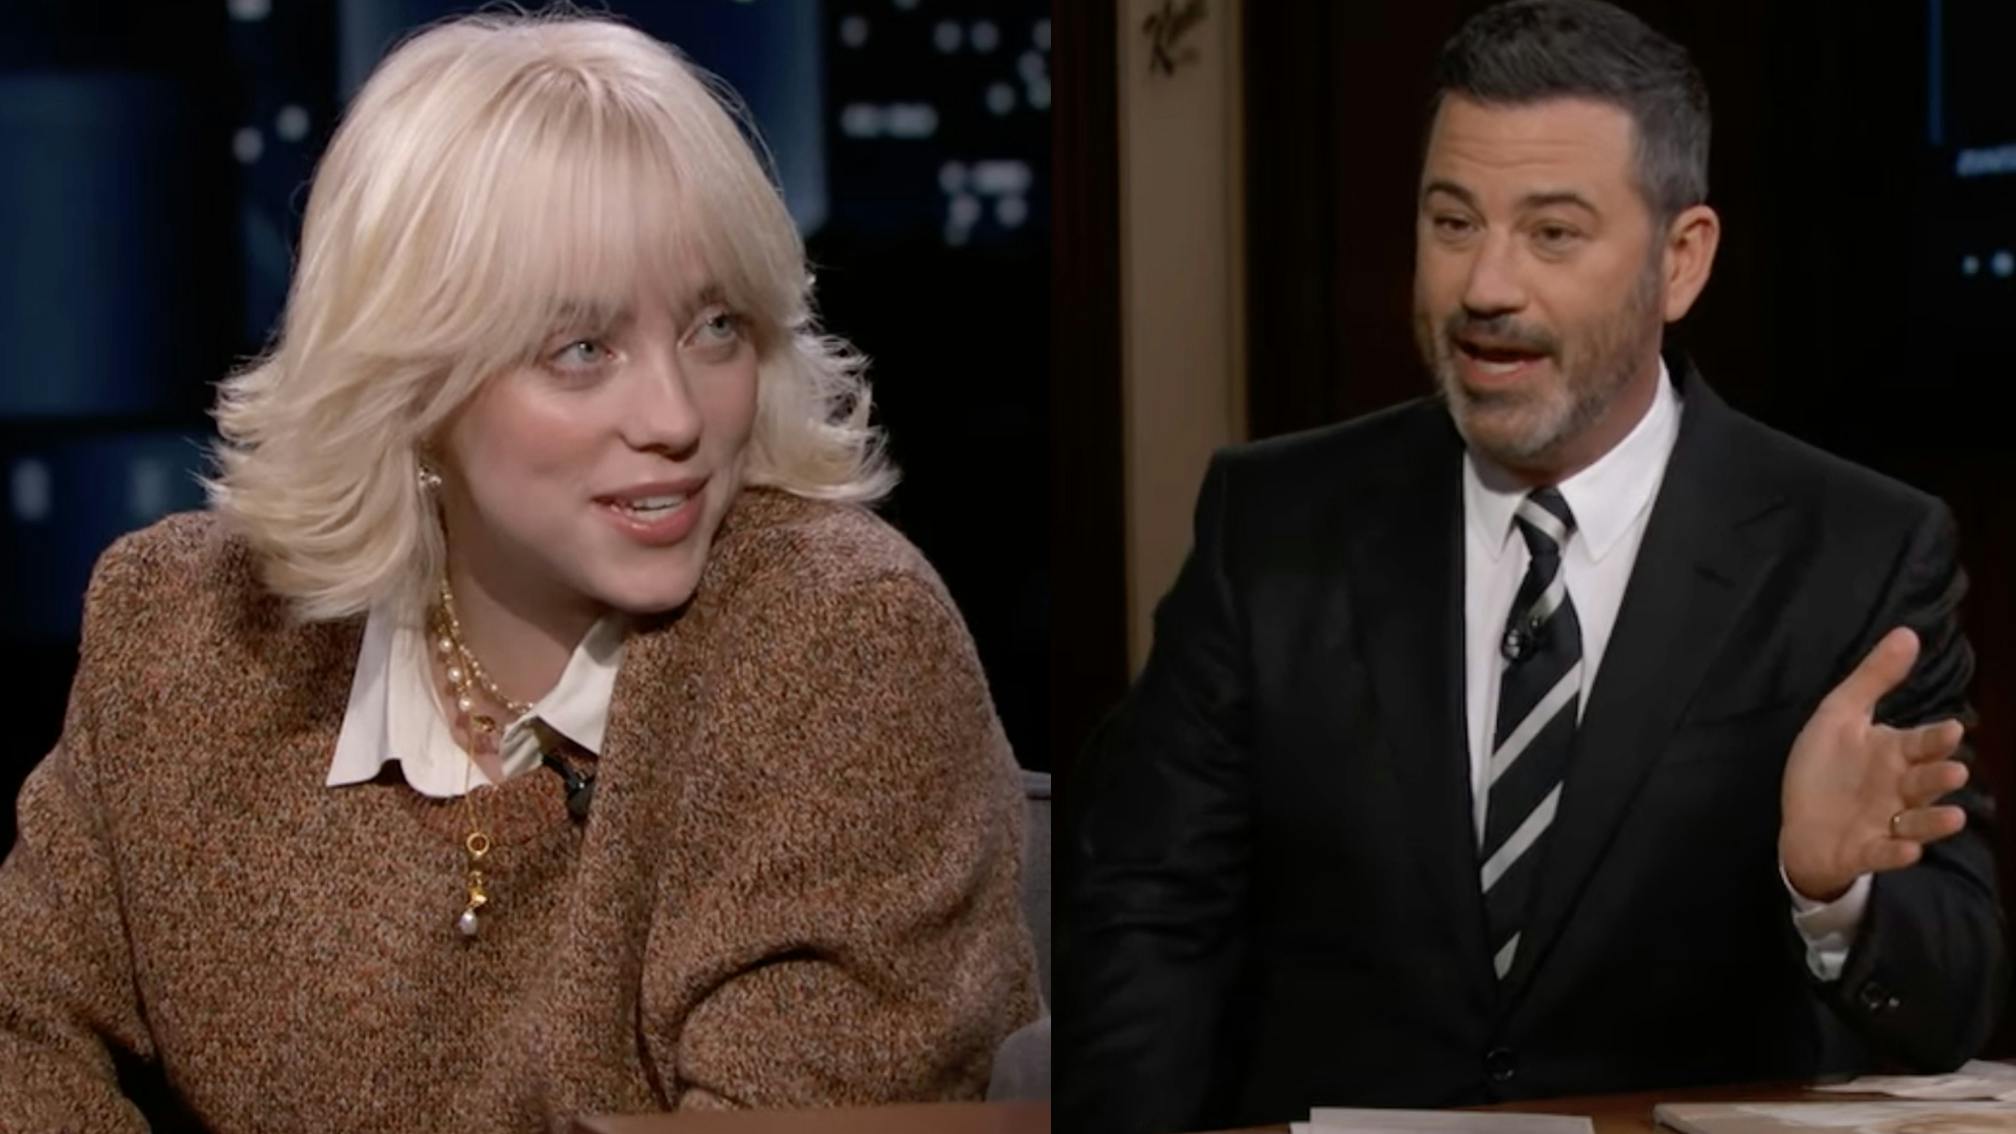 Billie Eilish calls out Jimmy Kimmel for viral Van Halen question: "Everybody thought I was actually serious"